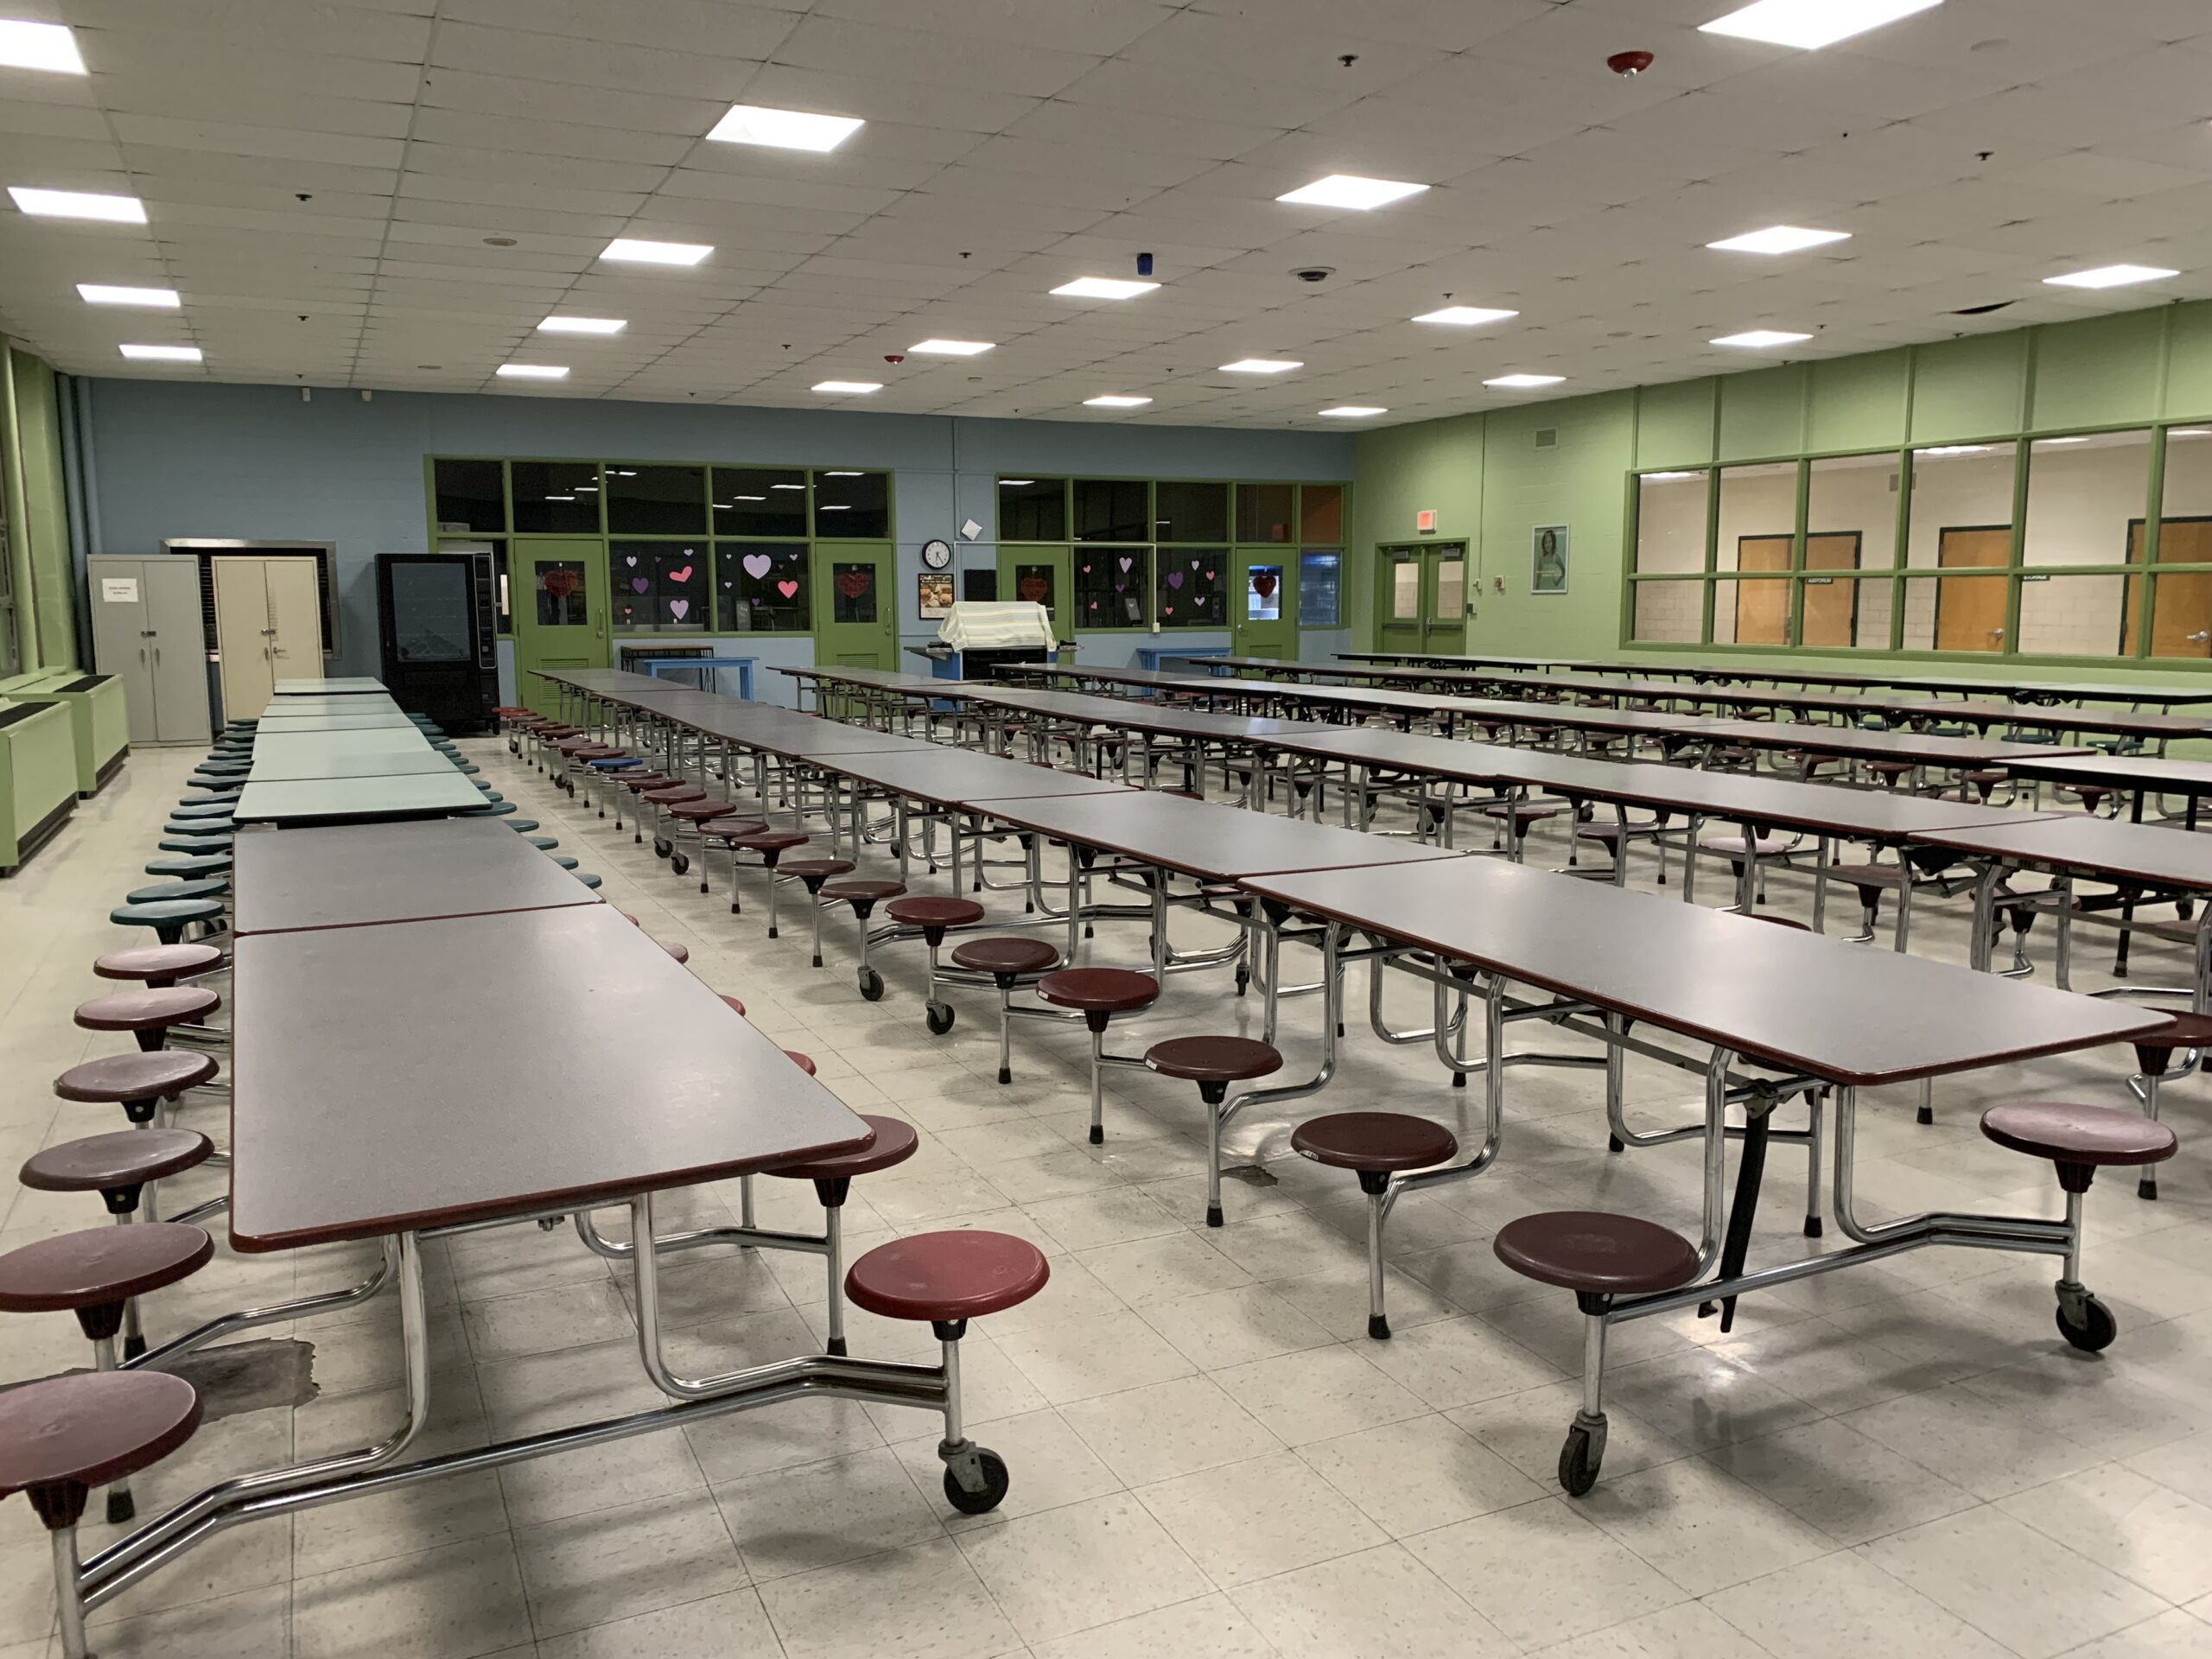 Free meals available at Hopkinton schools